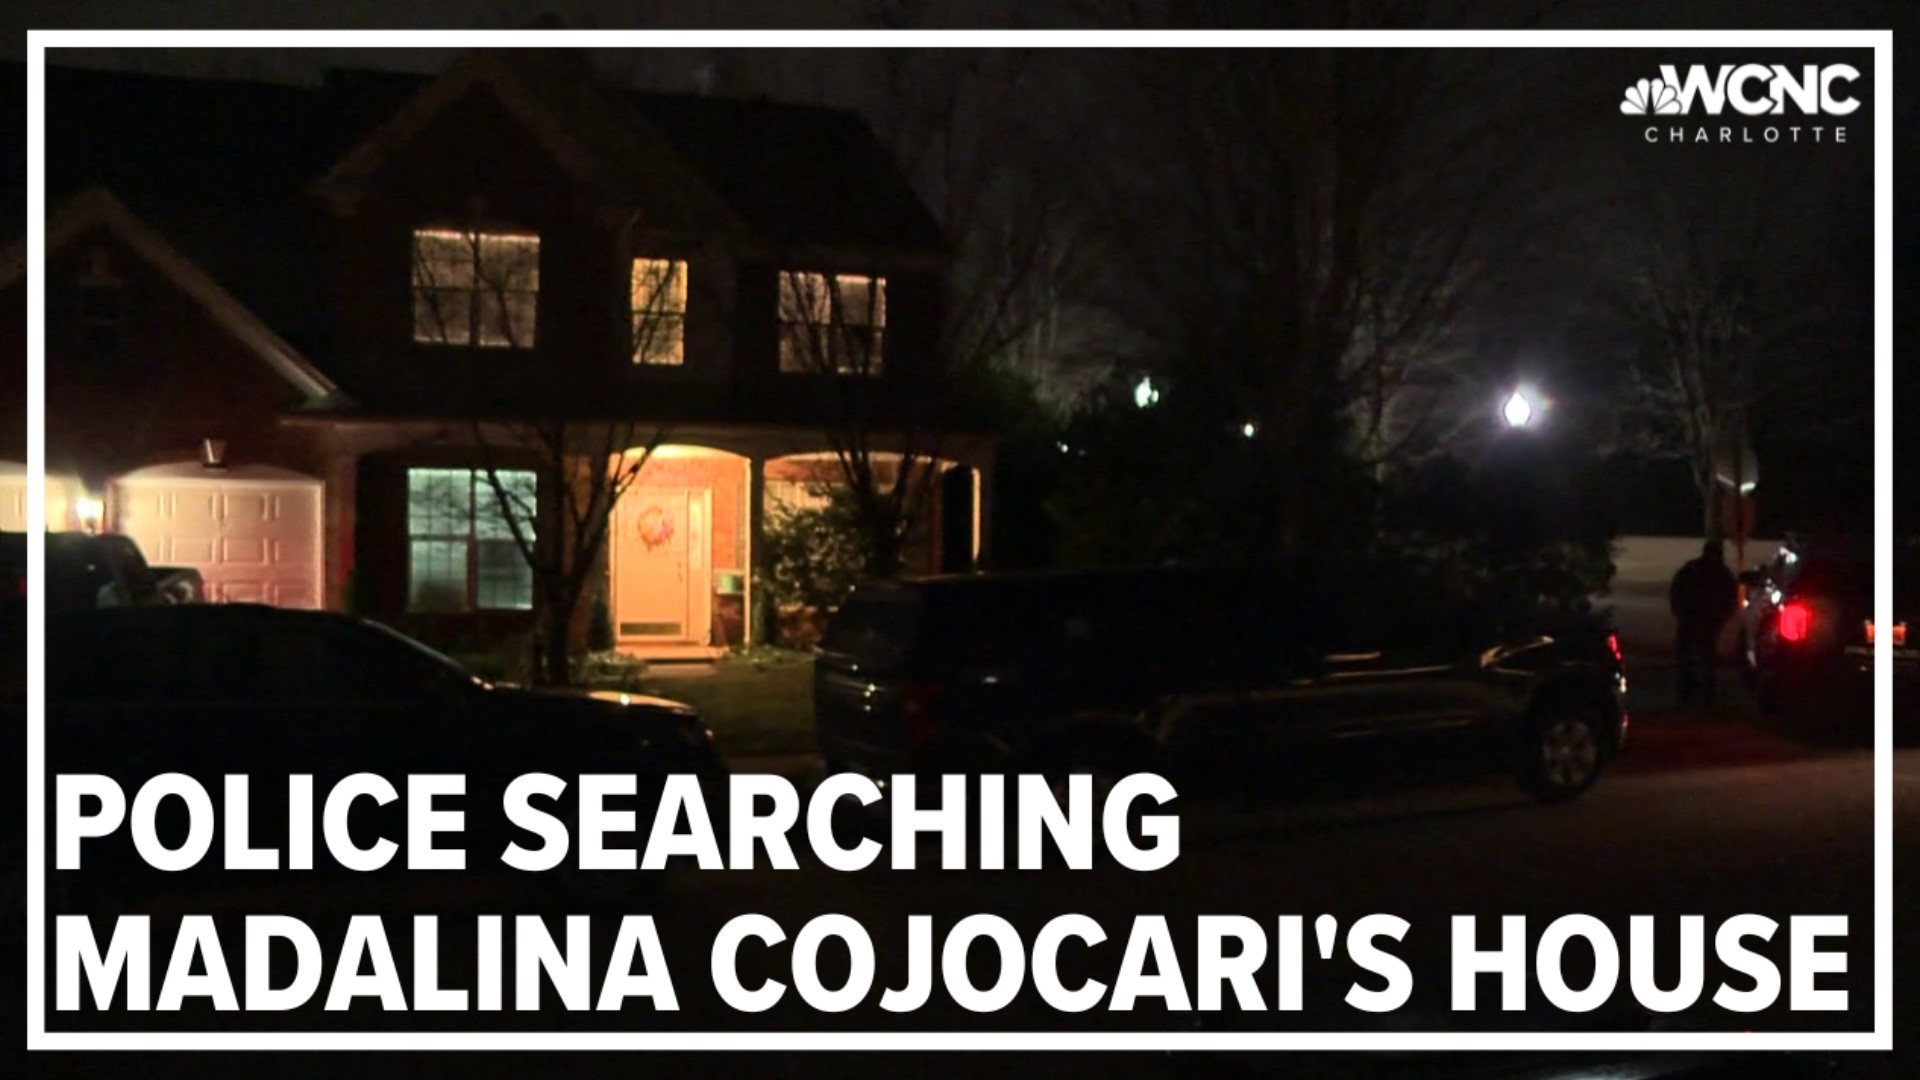 Wednesday afternoon, investigators returned to Cojocari's home. Officers were seen taking a box from the home and putting it in a crime scene van.